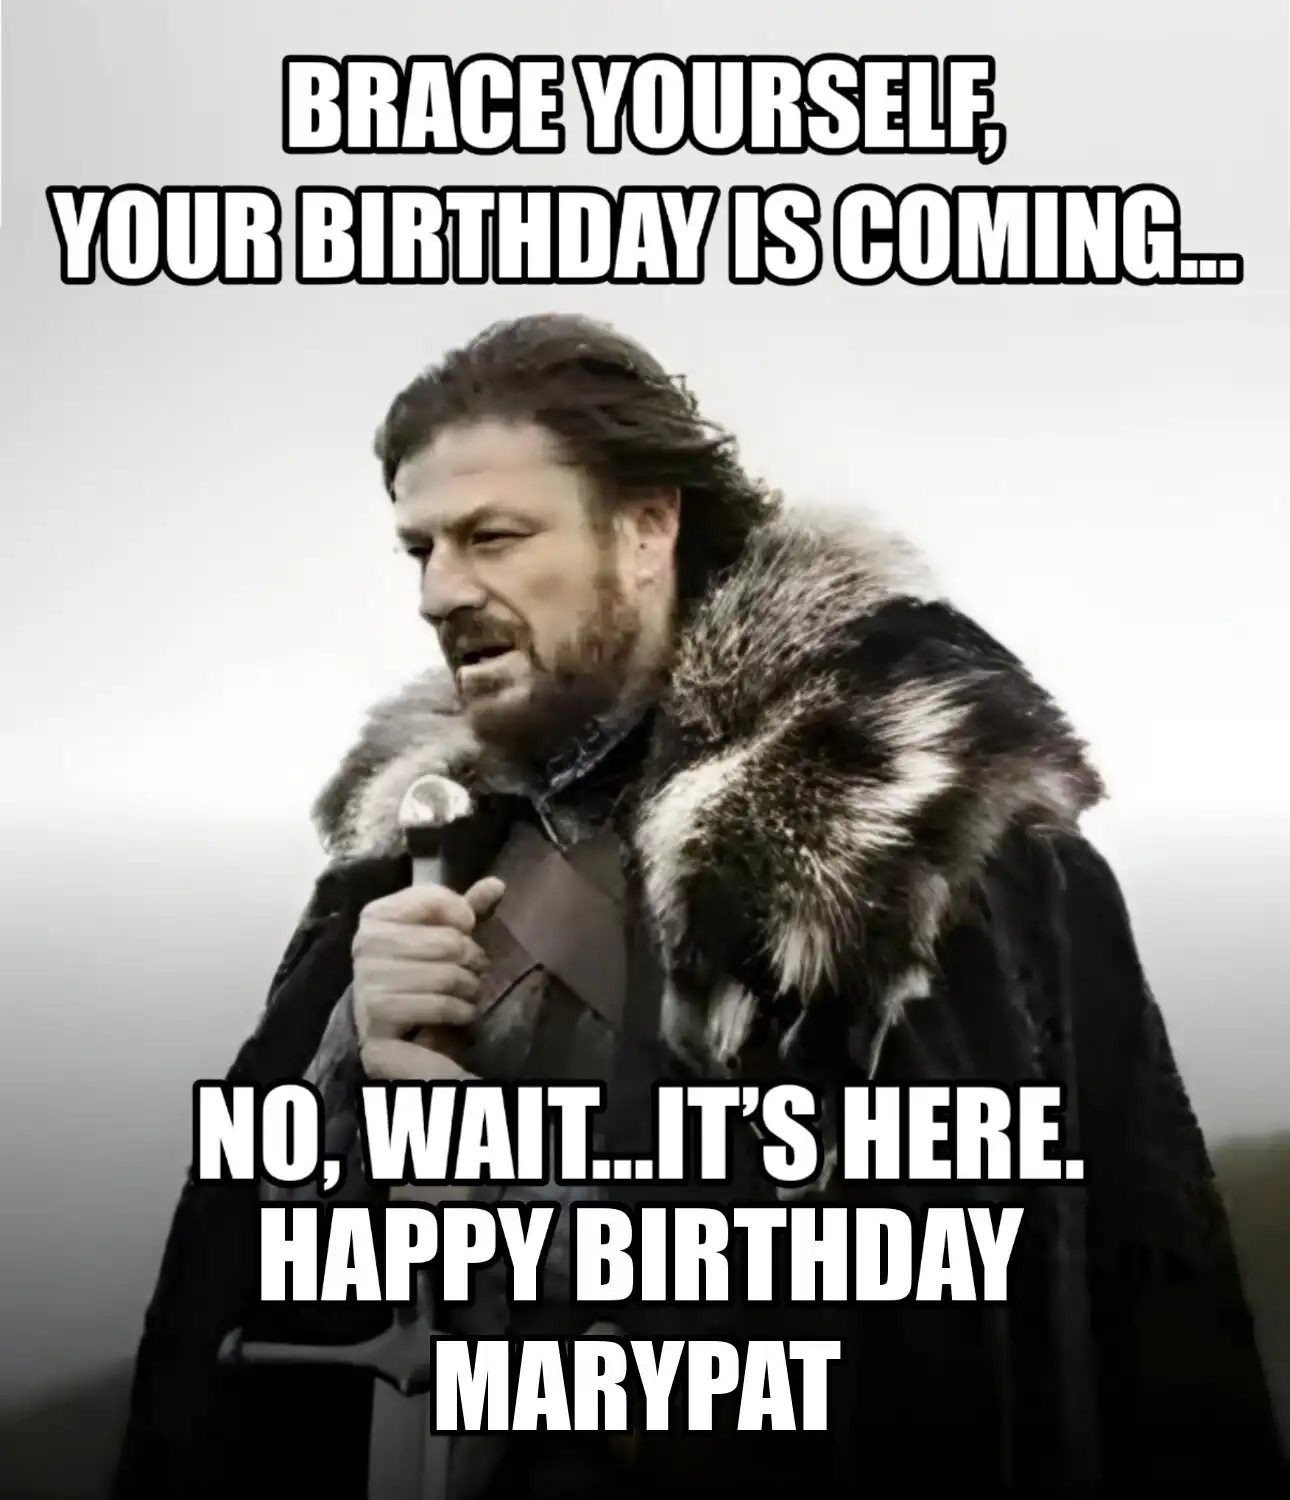 Happy Birthday Marypat Brace Yourself Your Birthday Is Coming Meme